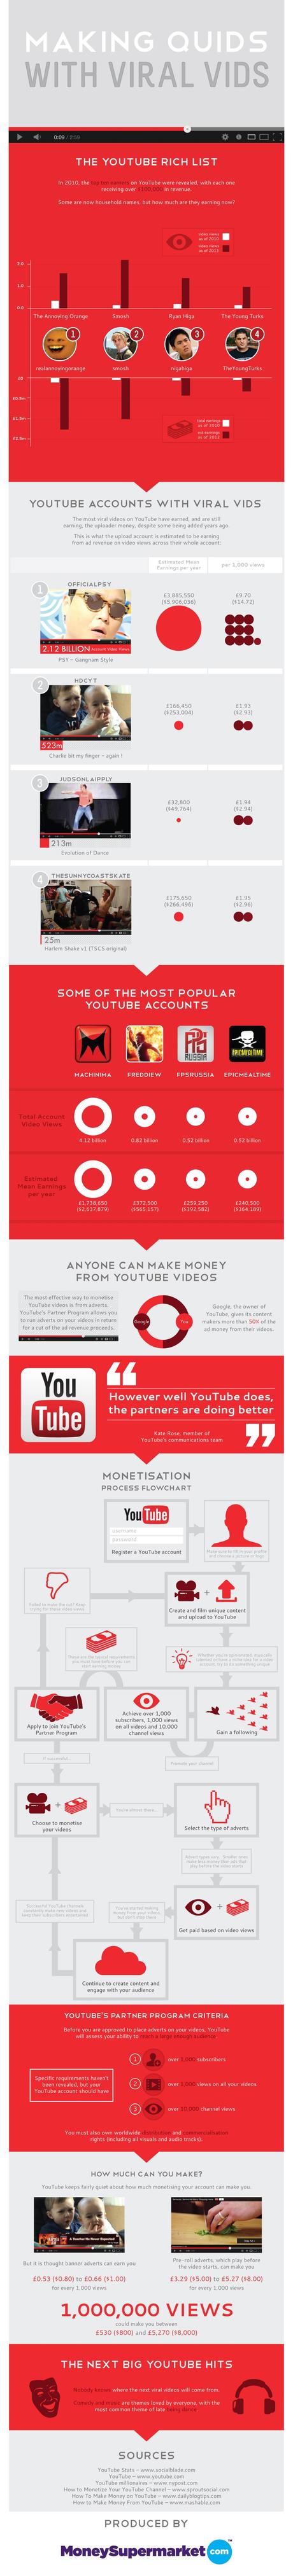 Making Money from Viral Videos on YouTube (Infographic)